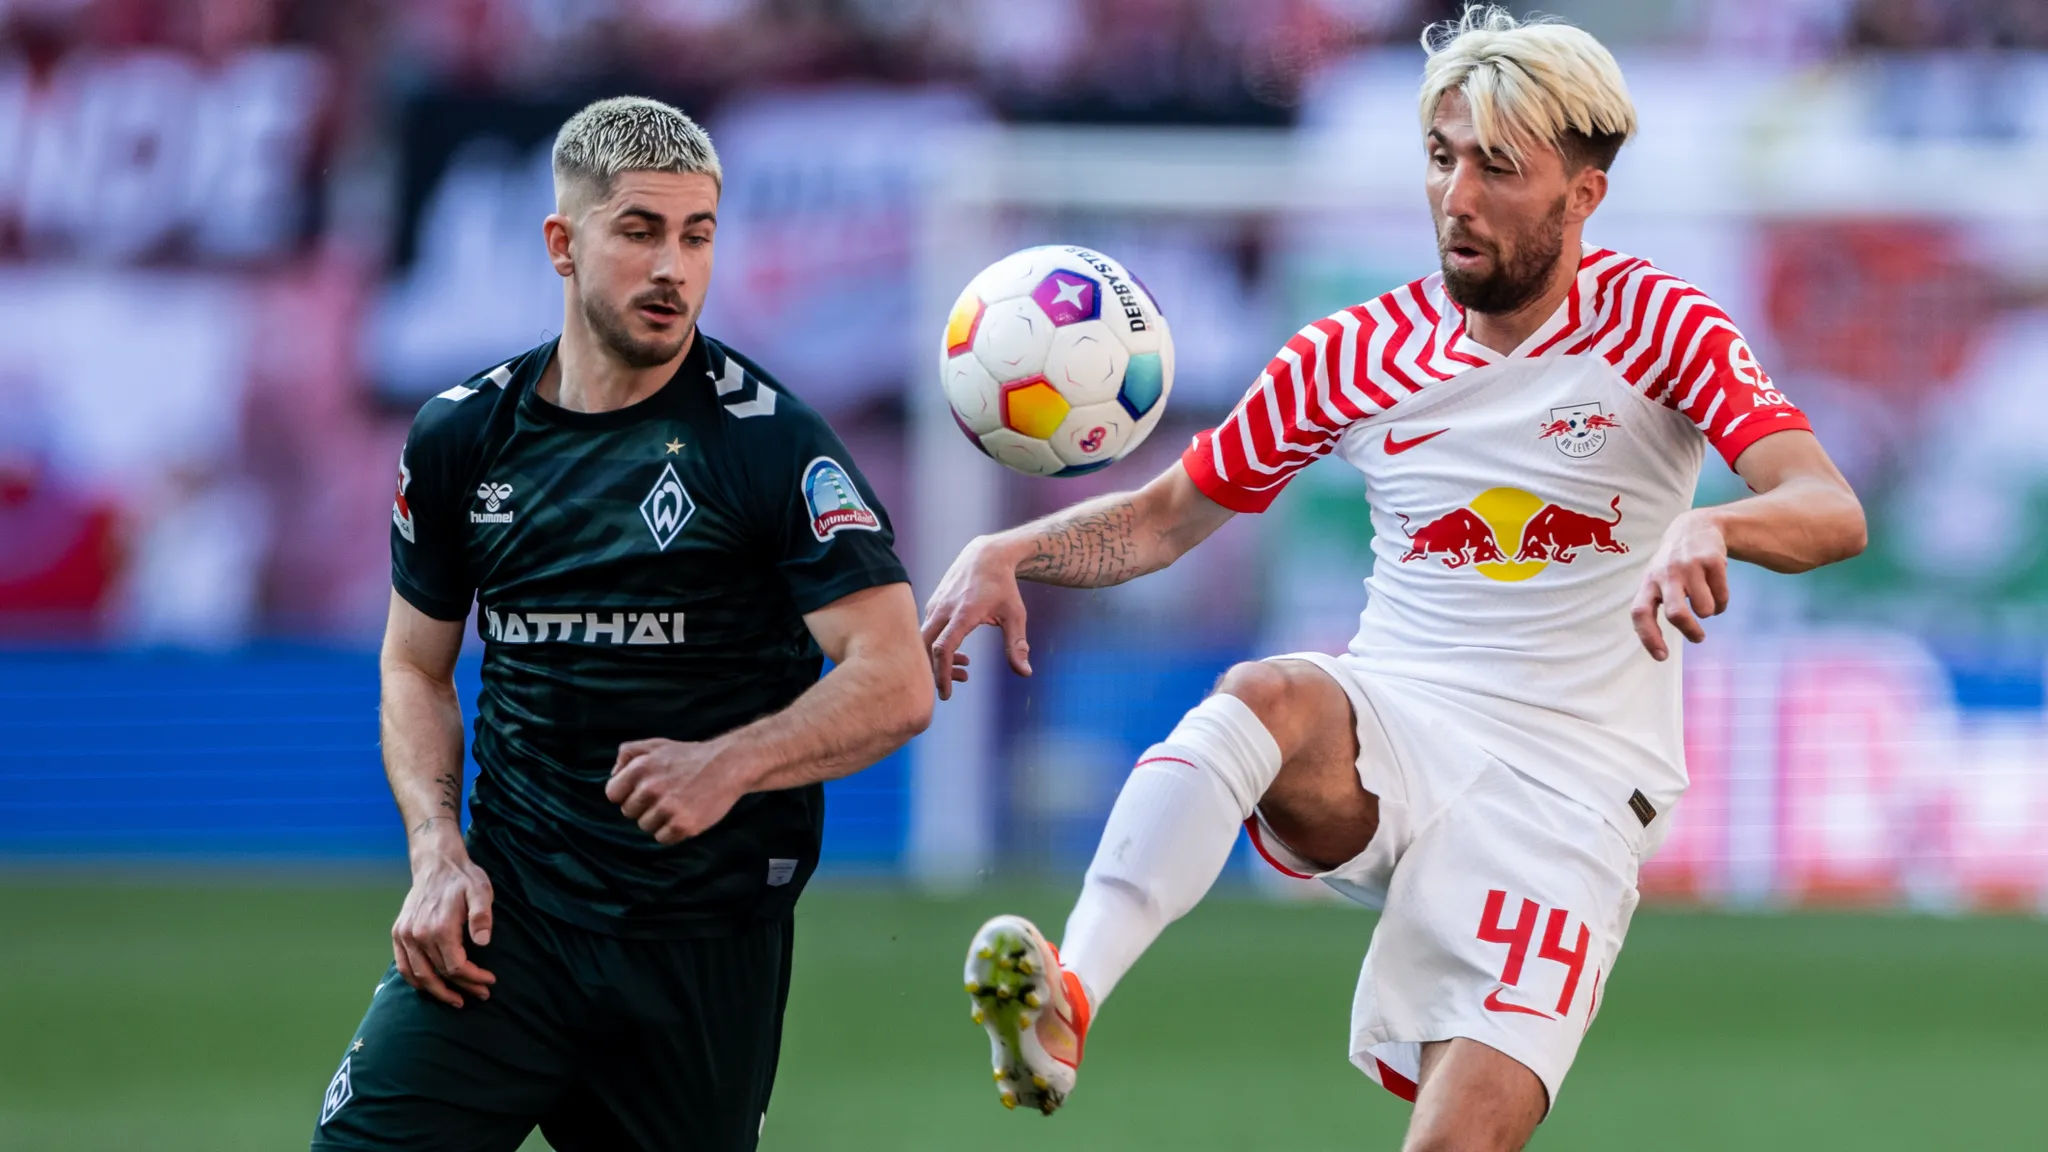 Bremen's Romano Schmid and Kevin Kampl fighting for the ball.